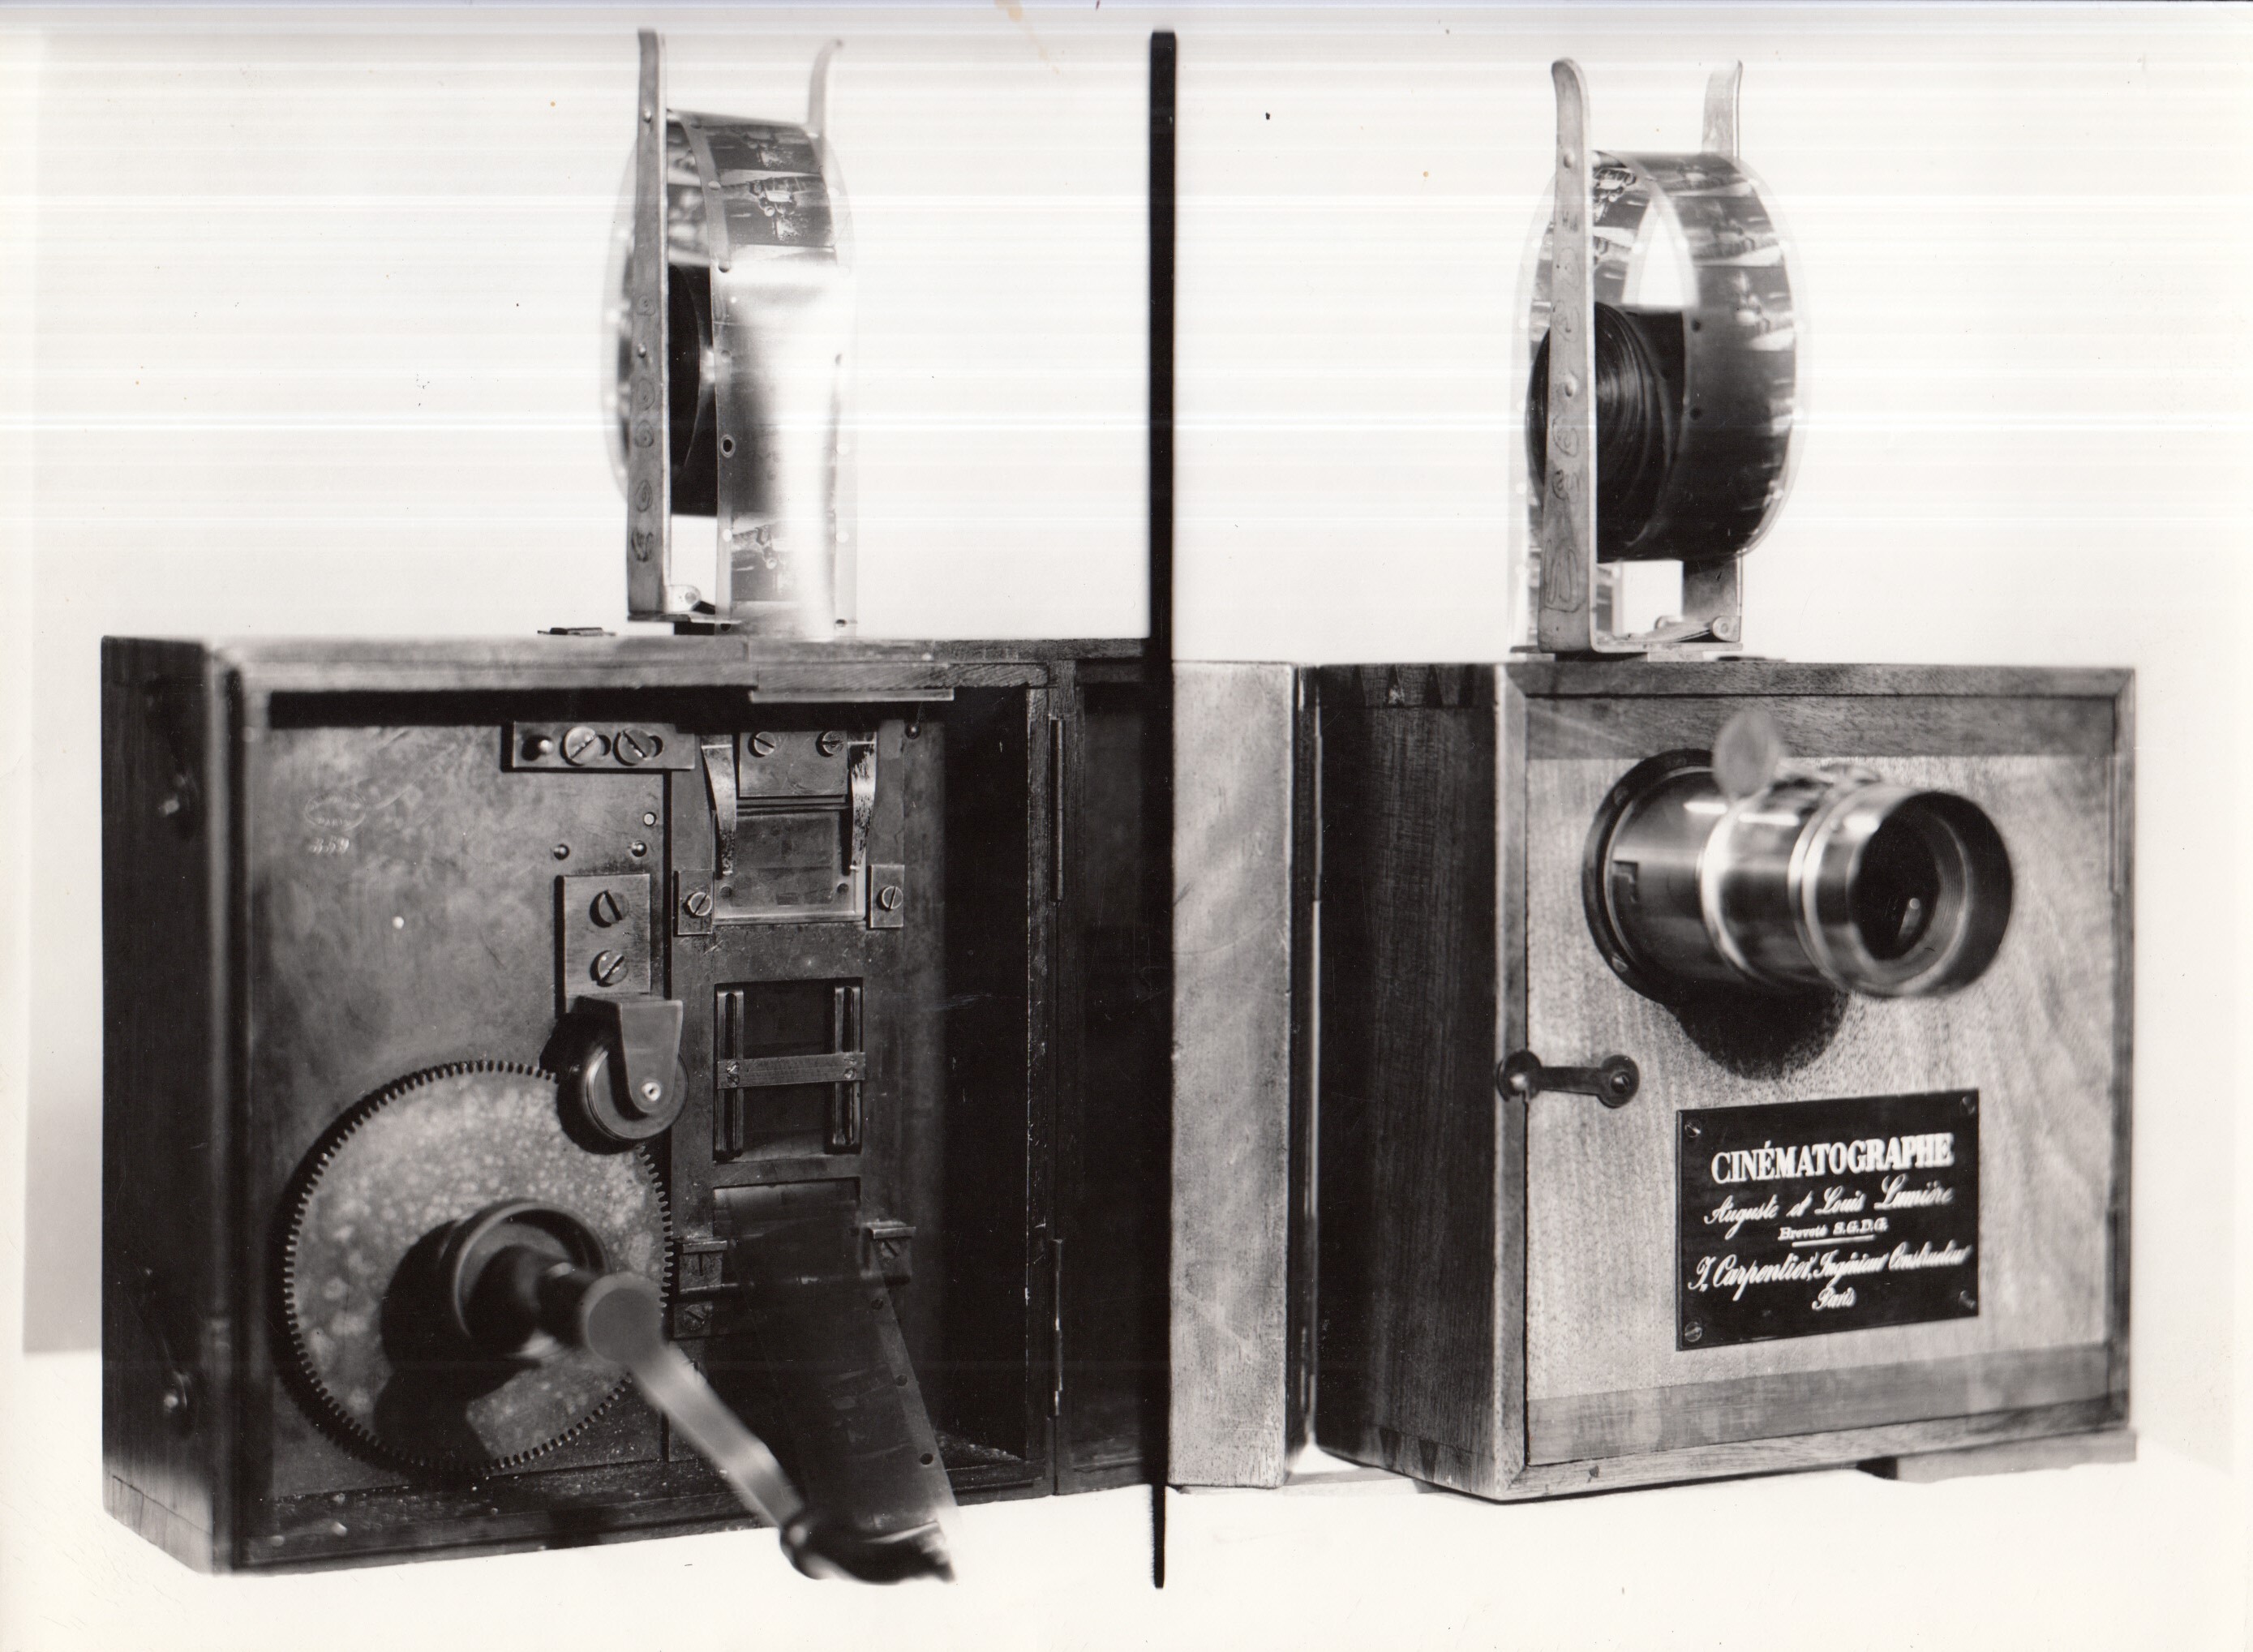 Cinematographe Lumiere motion picture projector, two views, front and rear. By Auguste & Louis Lumiere.